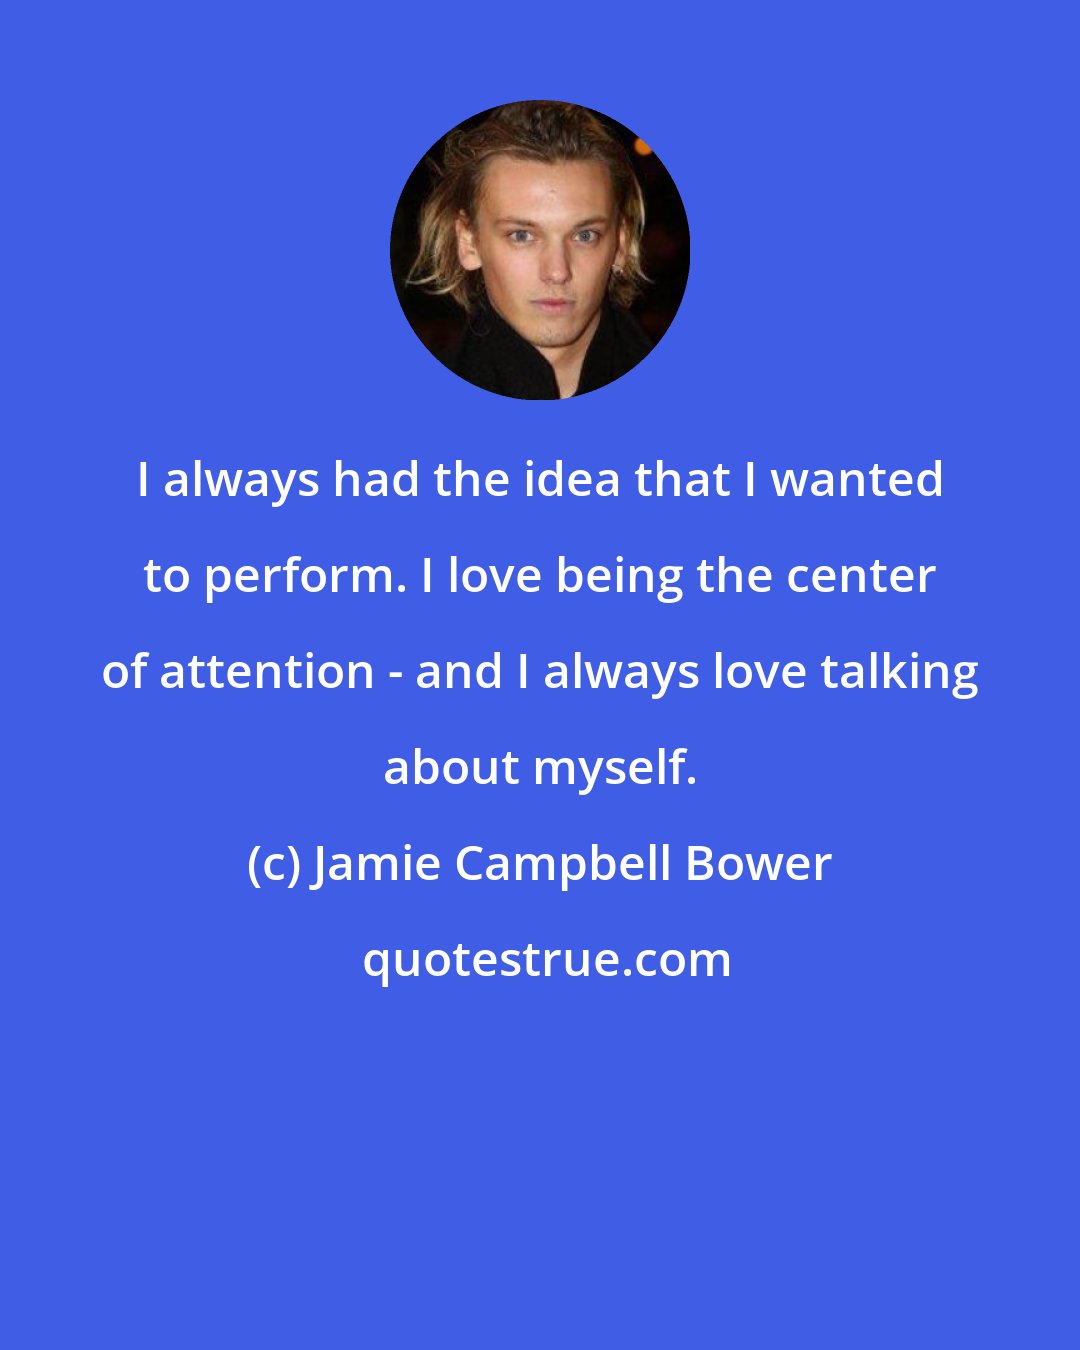 Jamie Campbell Bower: I always had the idea that I wanted to perform. I love being the center of attention - and I always love talking about myself.